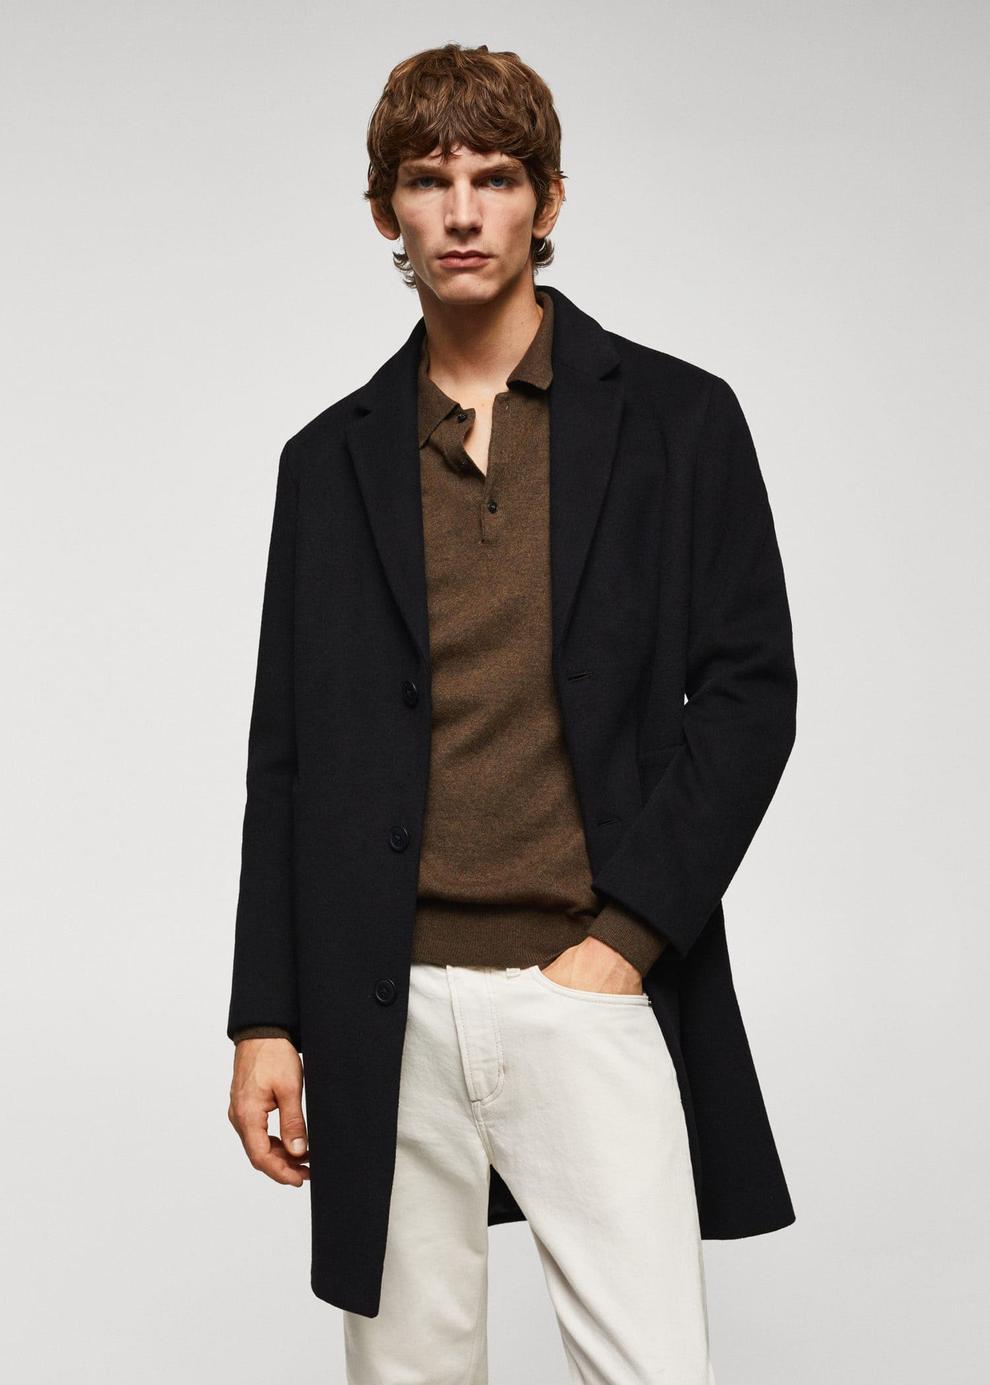 Recycled woollen coat offers at S$ 165.9 in HE by Mango